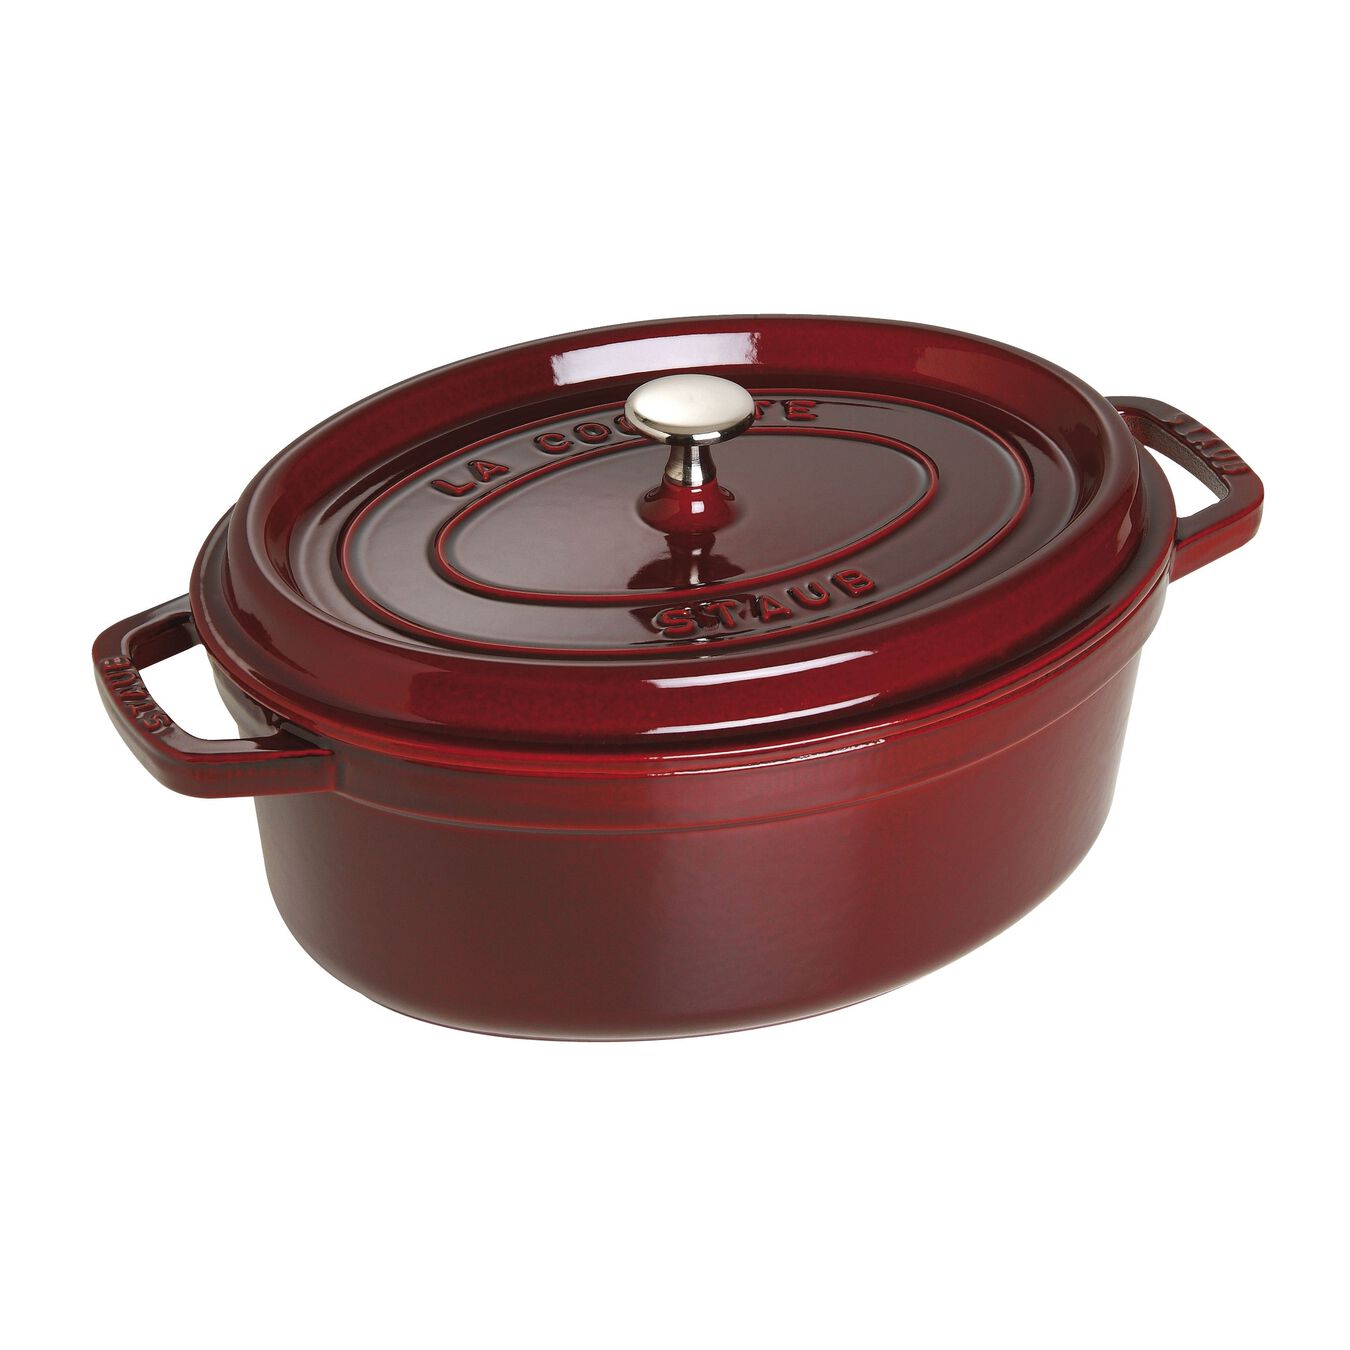 Cocotte 31 cm, oval, Grenadine-Rot, Gusseisen,,large 2